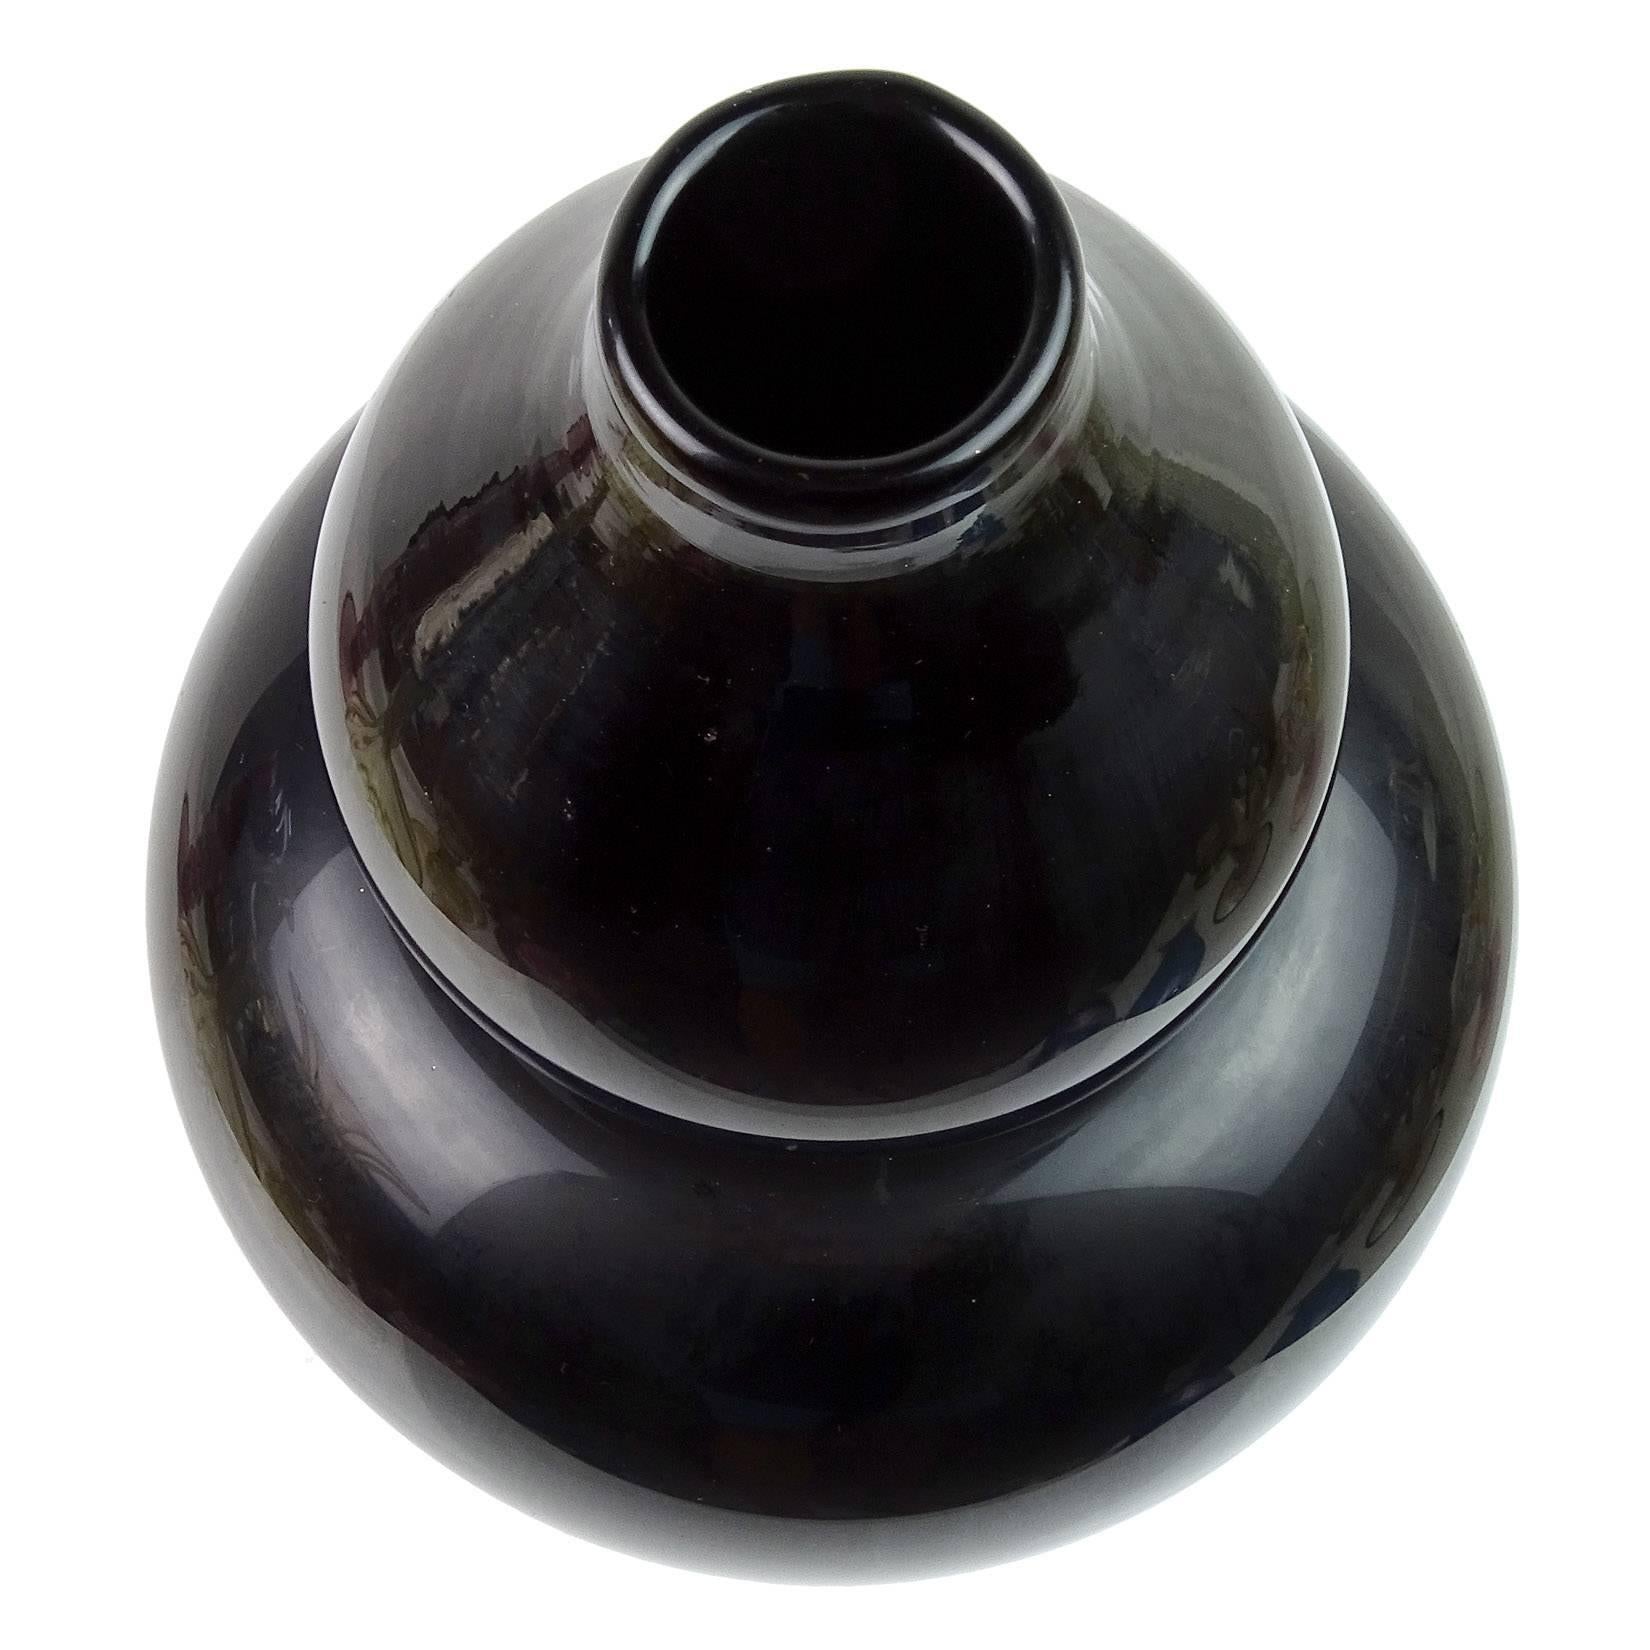 Free shipping worldwide! See details below description.

Very rare Murano handblown jet black, gourd shaped Italian art glass flower vase. Documented to designer Carlo Scarpa, and fully signed 